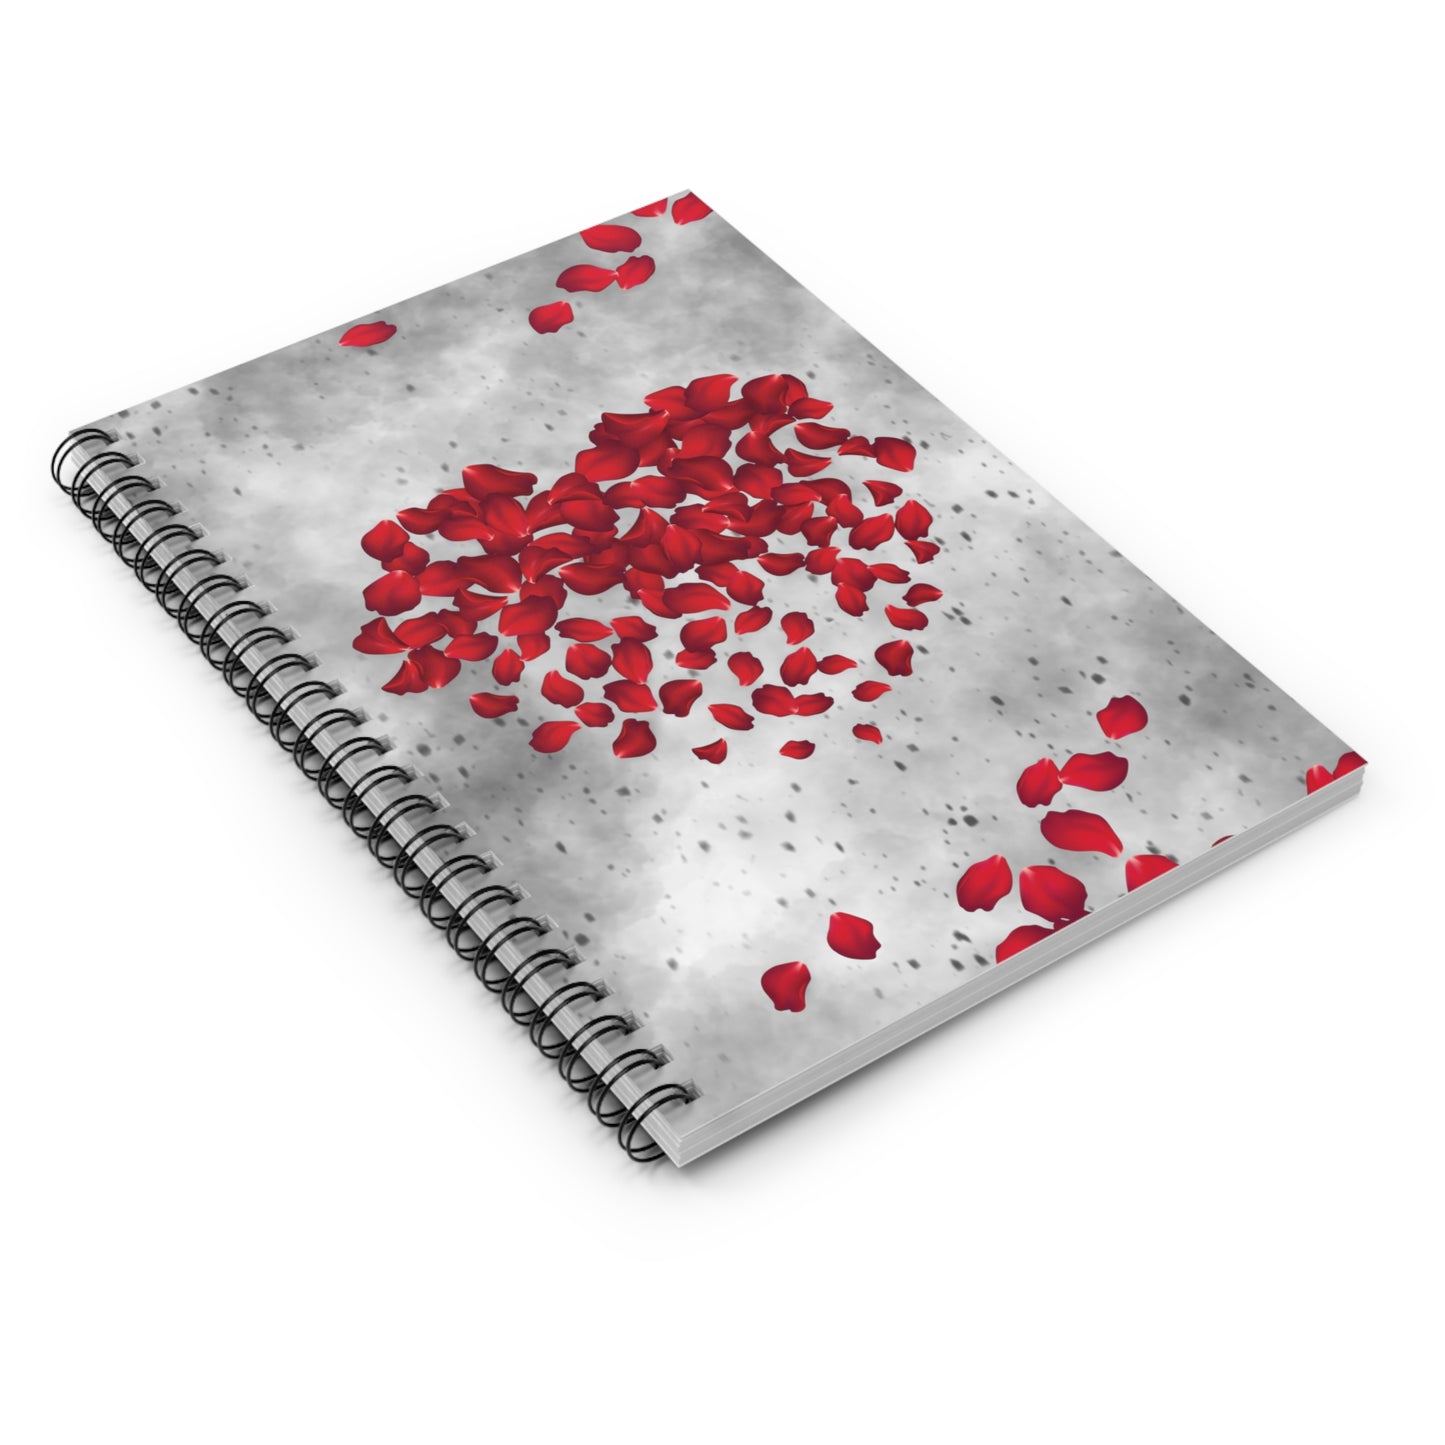 Rose Petal Heart: Spiral Notebook - Log Books - Journals - Diaries - and More Custom Printed by TheGlassyLass